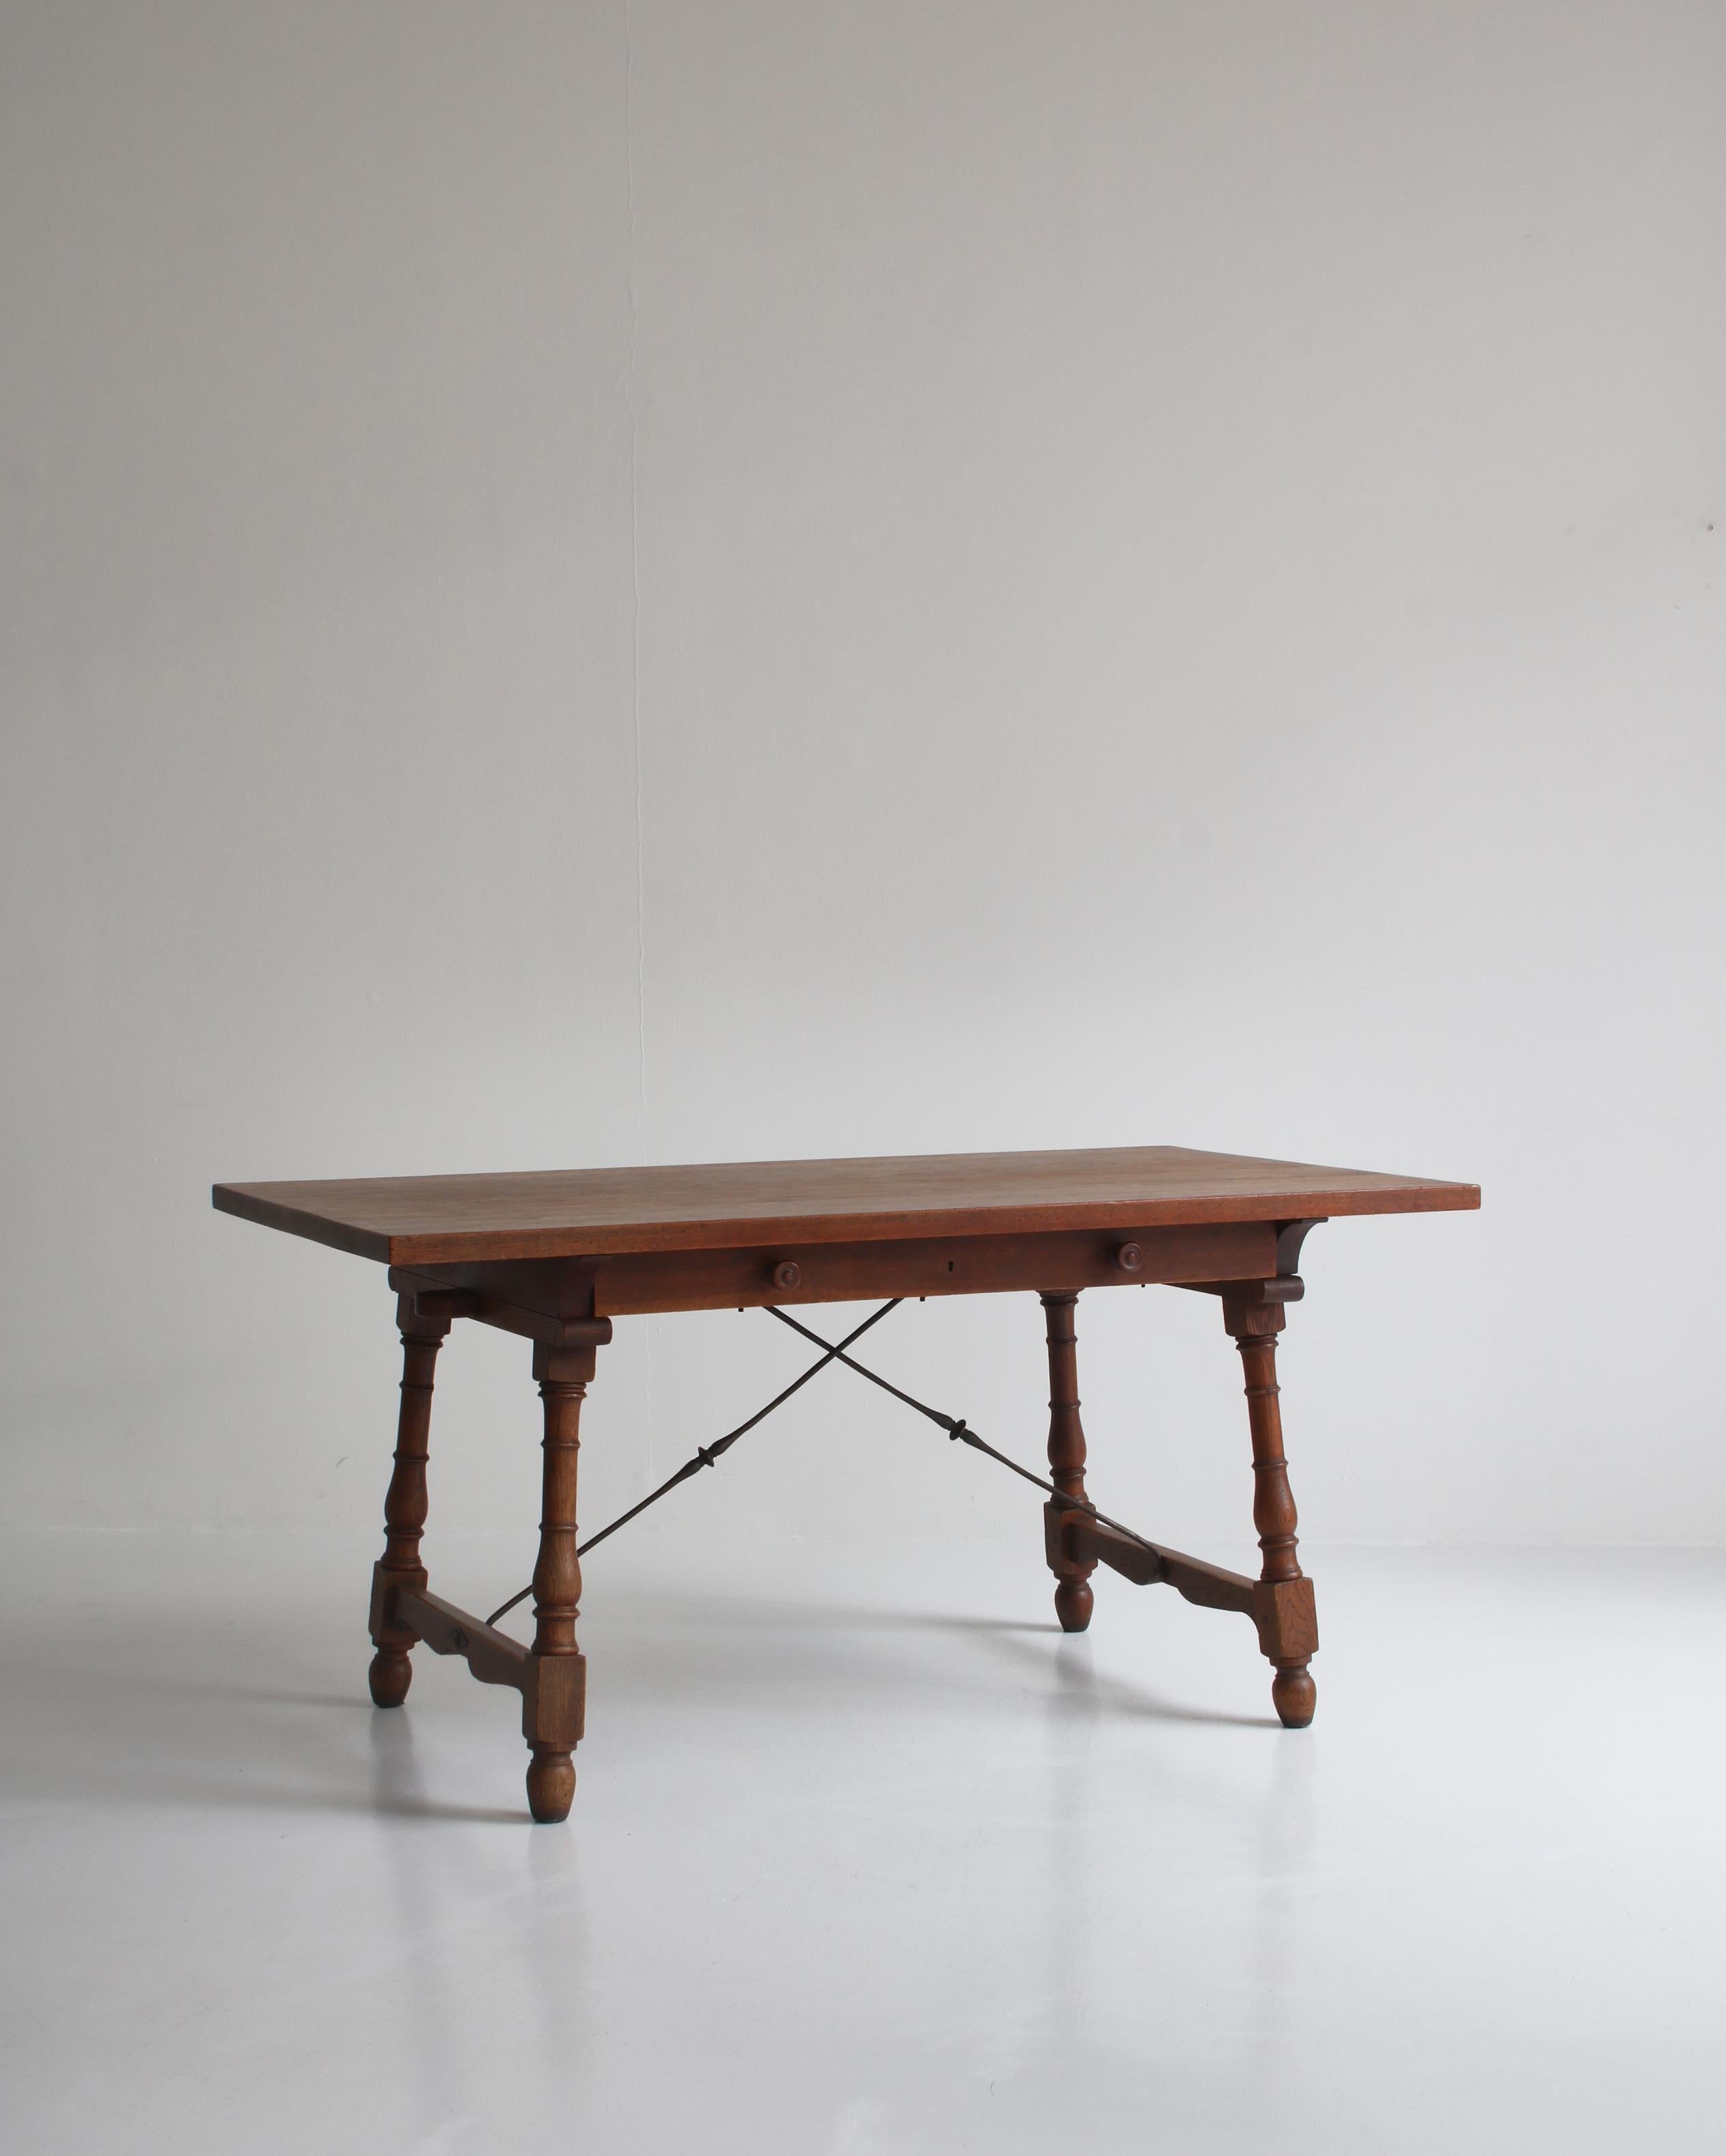 Scandinavian Modern Unique Desk or Table Made by Jens Harald Quistgaard in 1953, Solid Teak and Oak For Sale